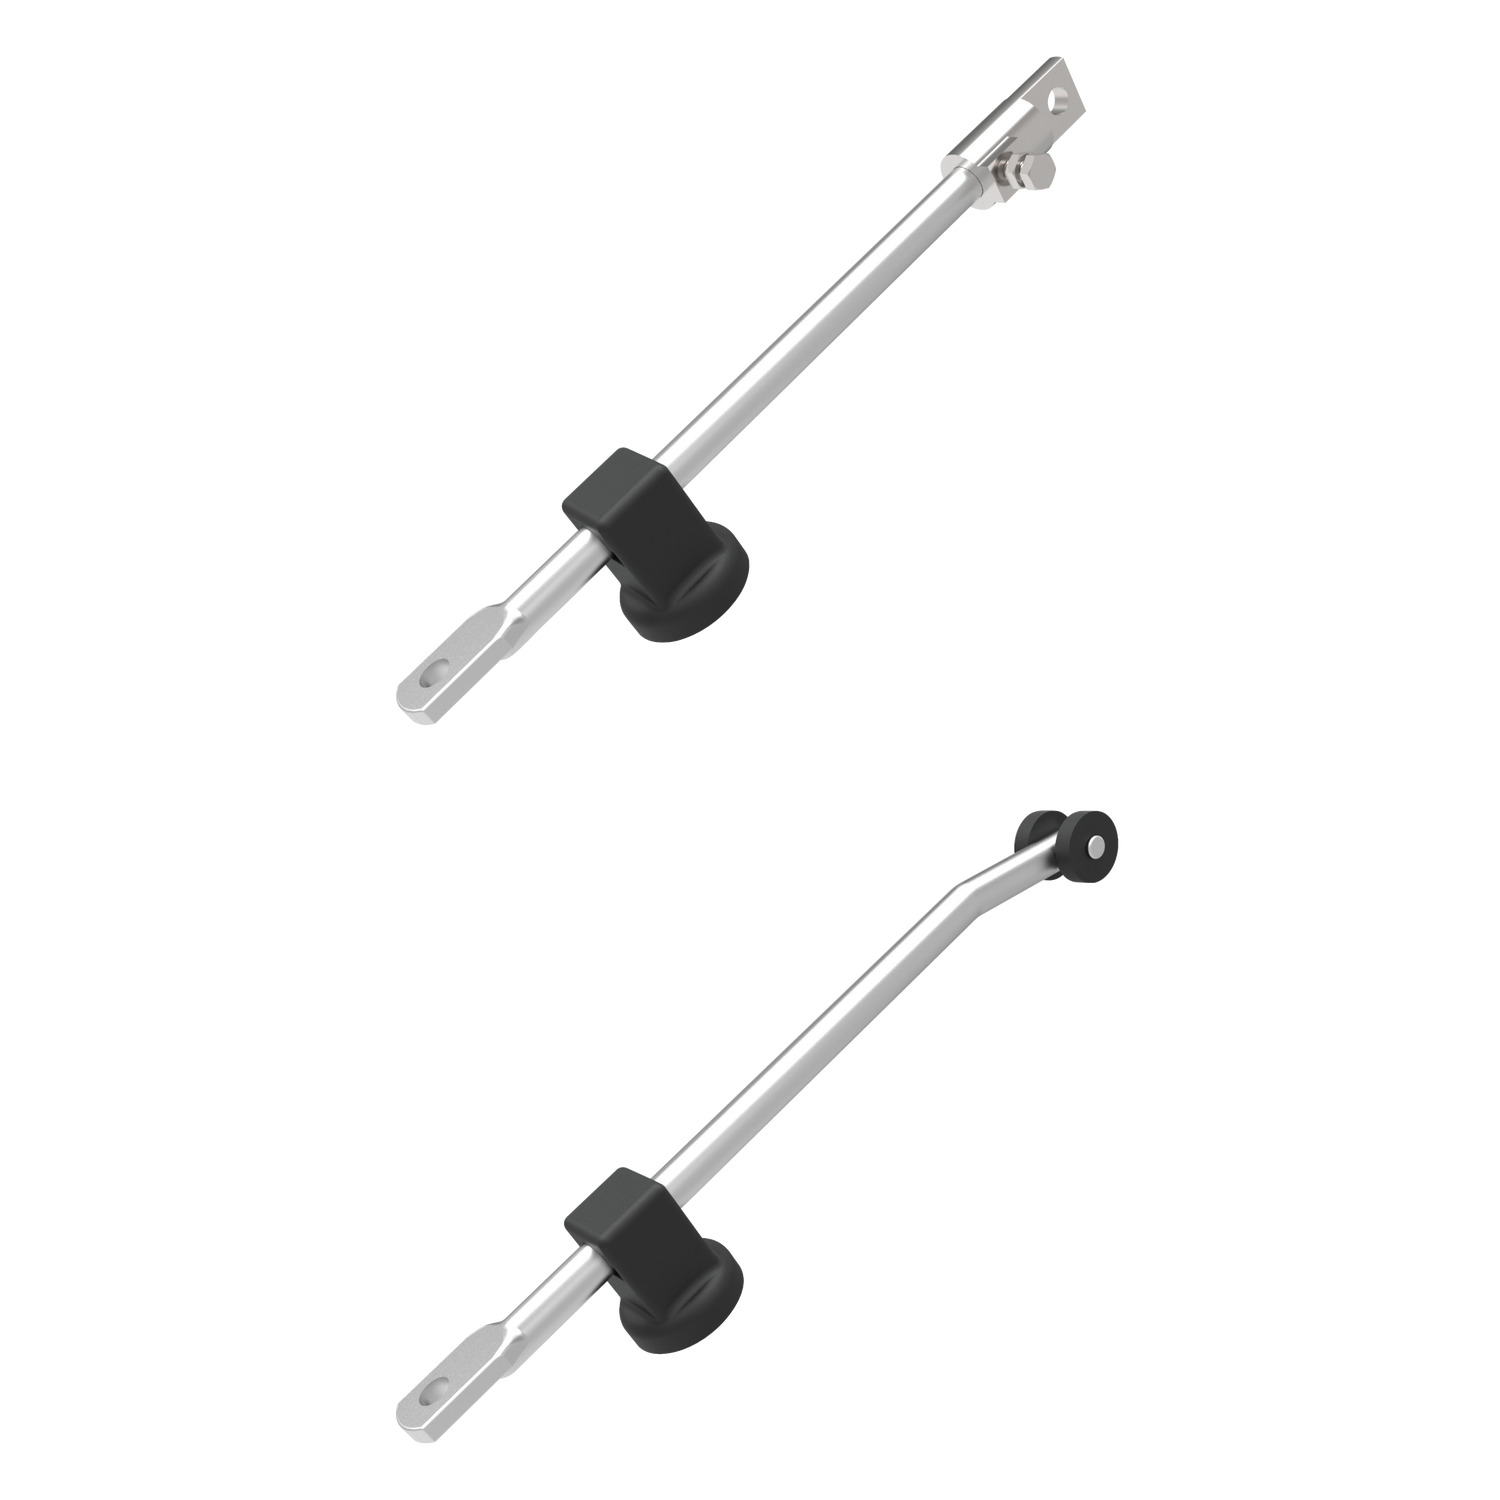 A0303.AW0861 Multi-Point Latching round rod - Guide One - Polyamide Plastic, Black